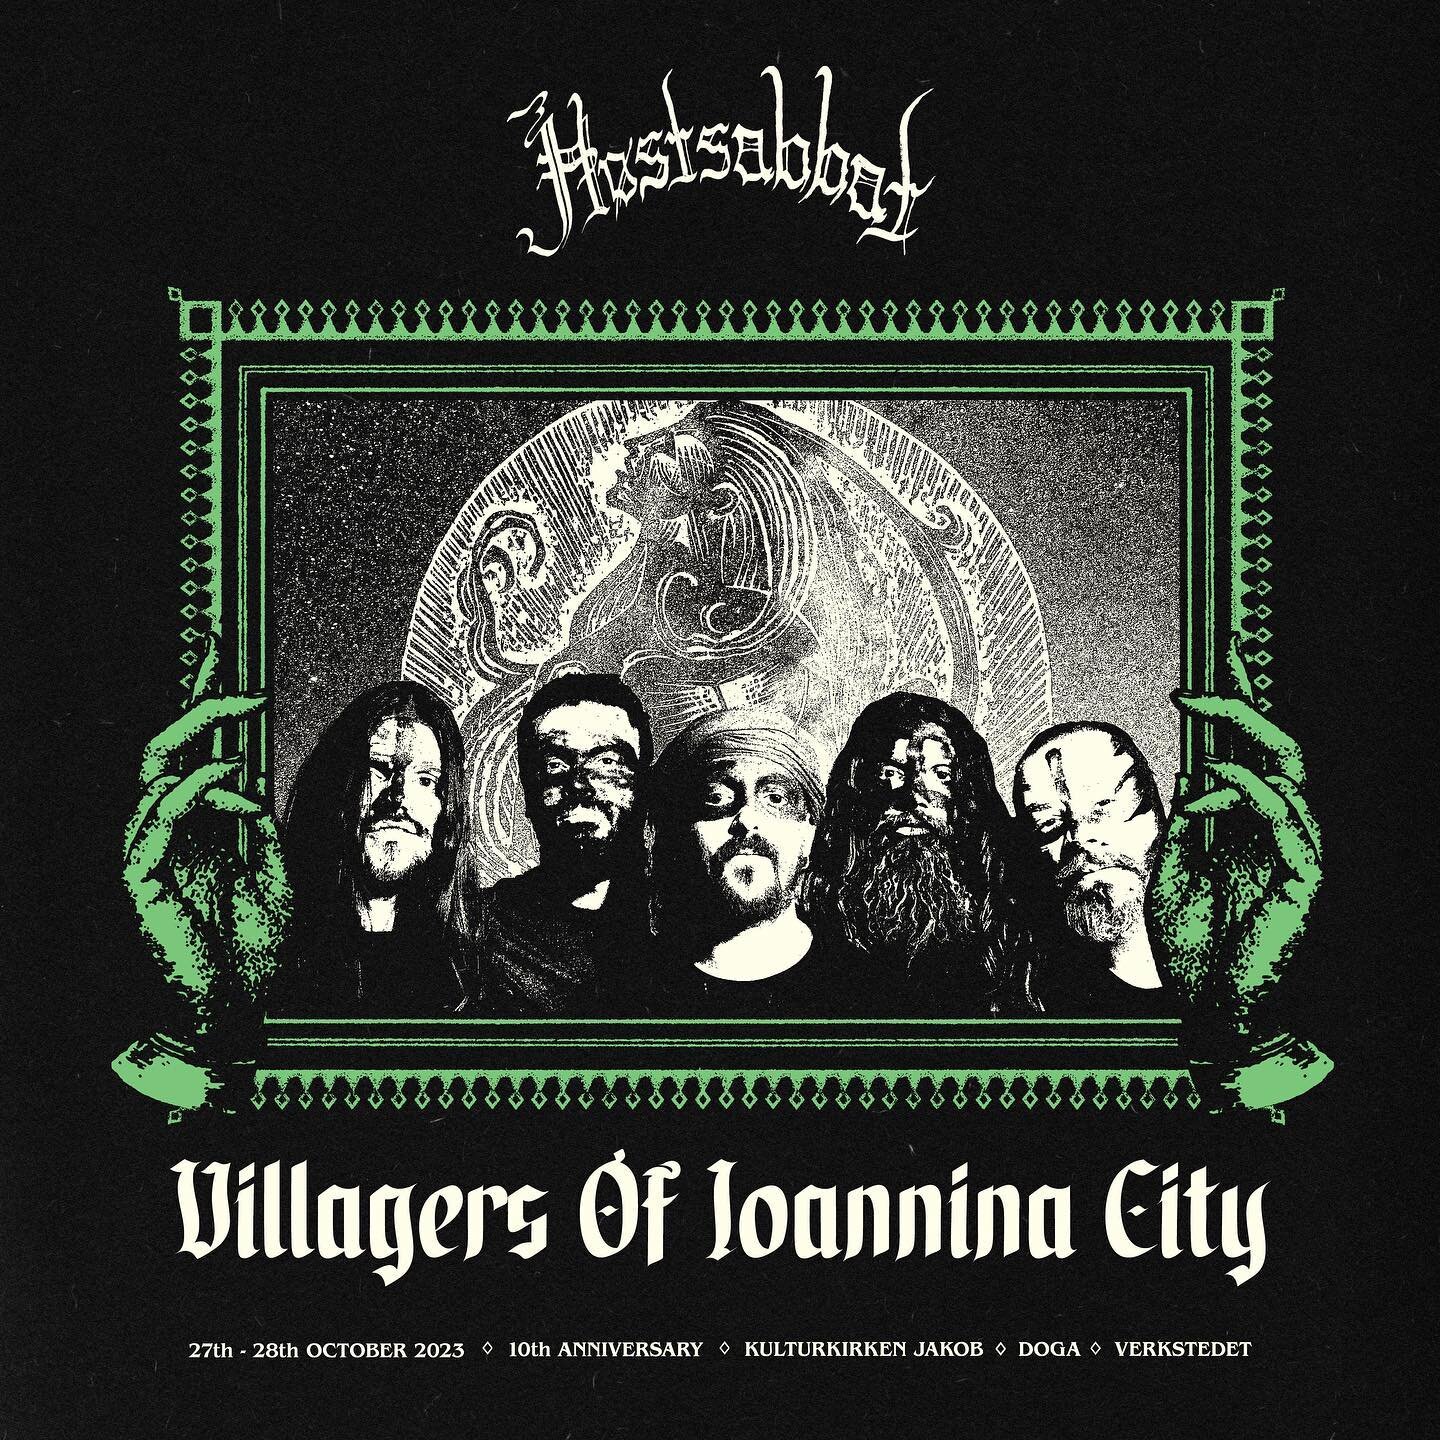 🔥VILLAGERS OF IOANNINA CITY🔥

The sun shines beautifully on this very Friday, and so does our next announcement. 

In massive contrast to the industrial, hard-hitting heaviness of last weeks announcement, Danish duo John Cxnnor, who by the way crus